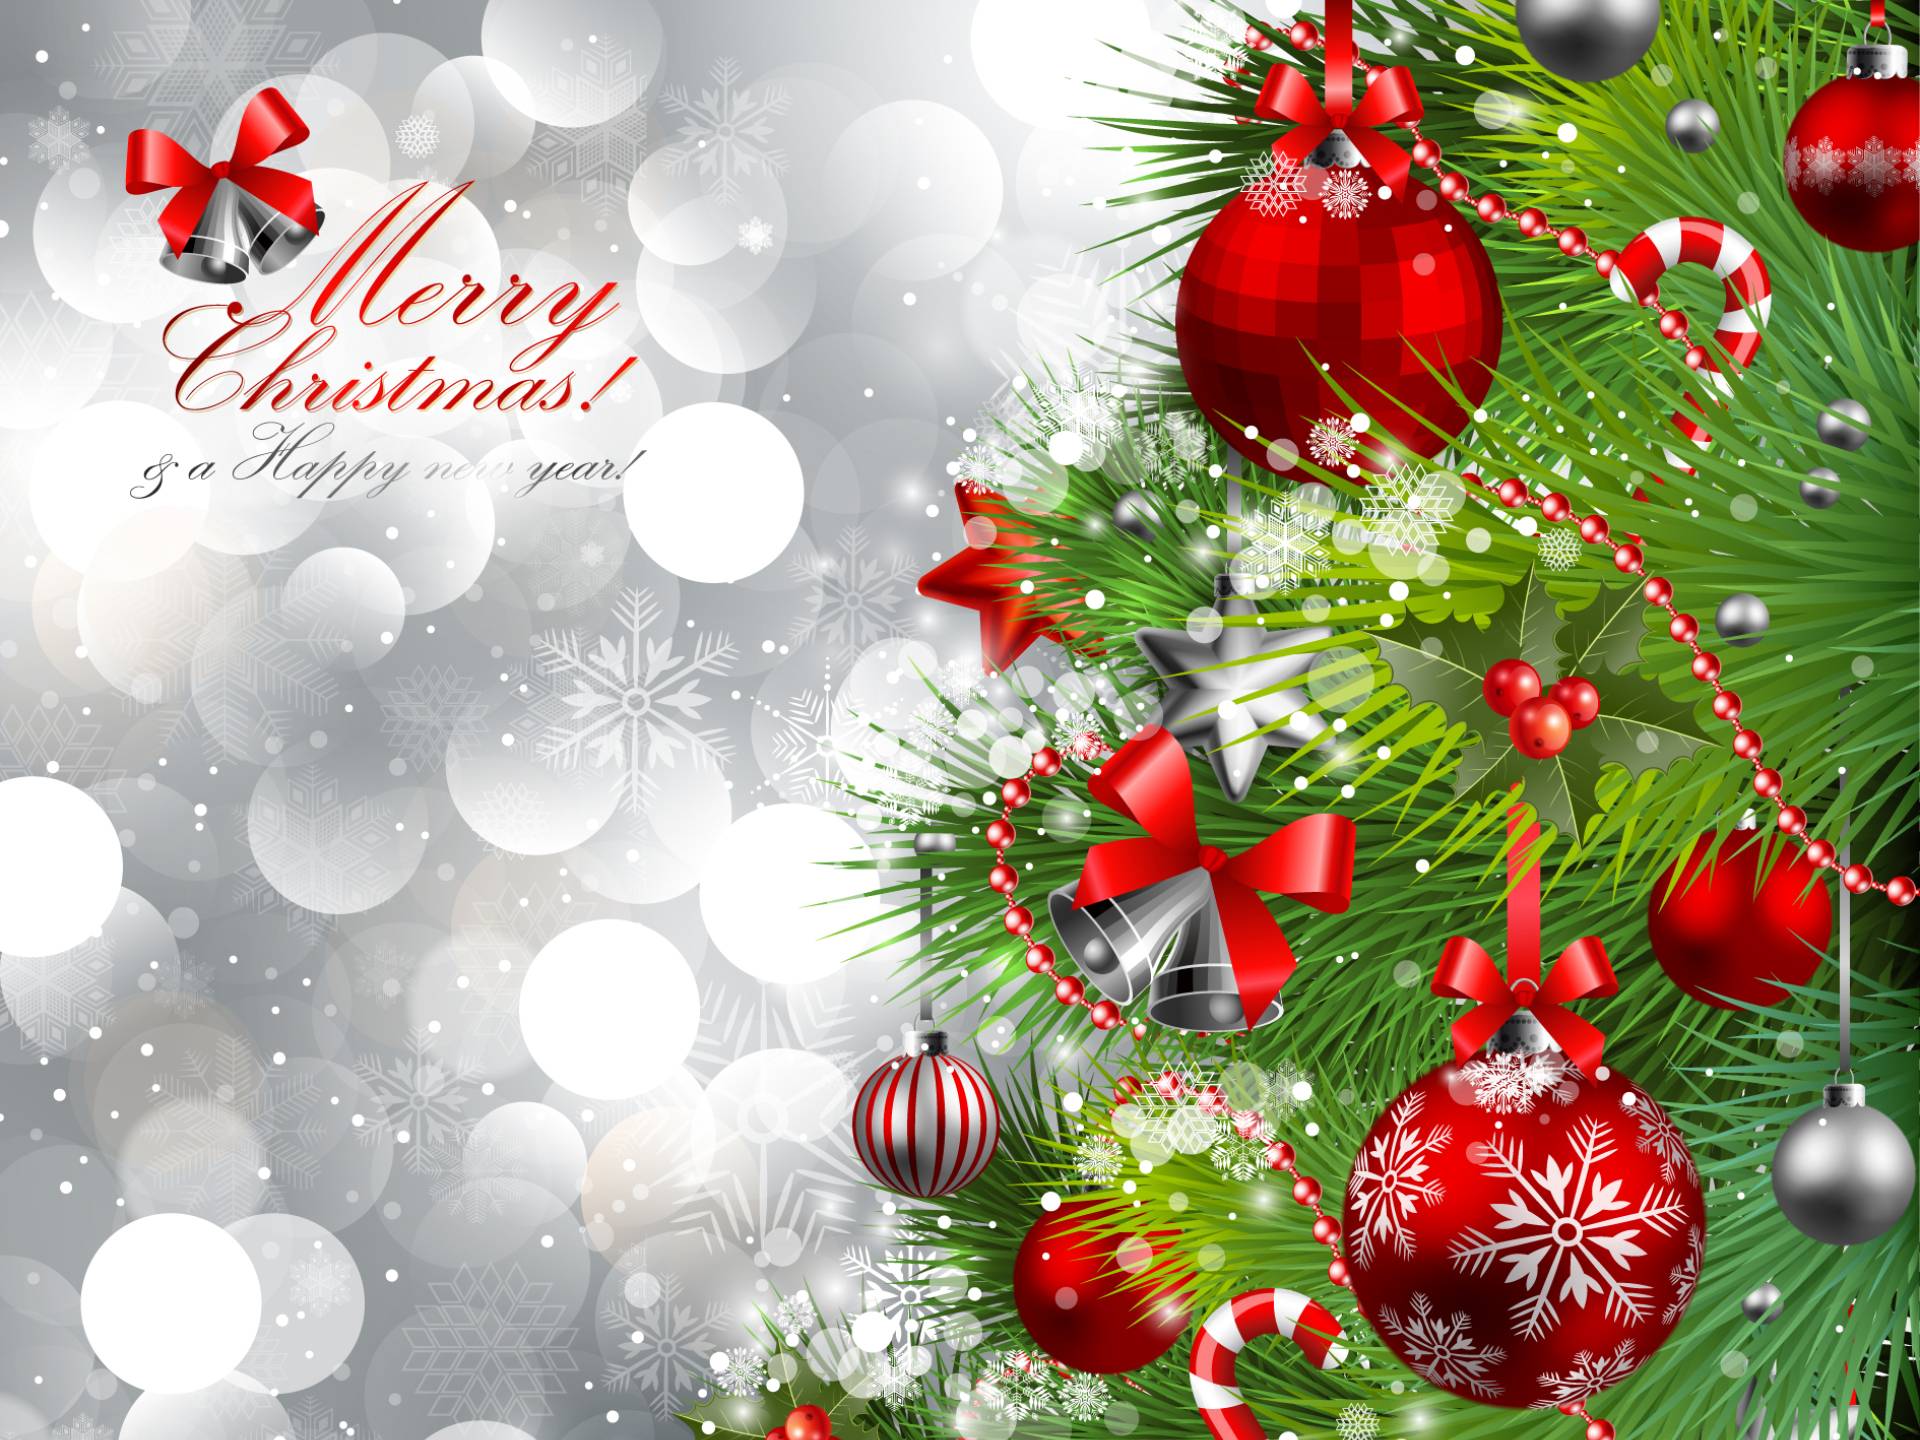 Merry Christmas HD Wallpaper, Background